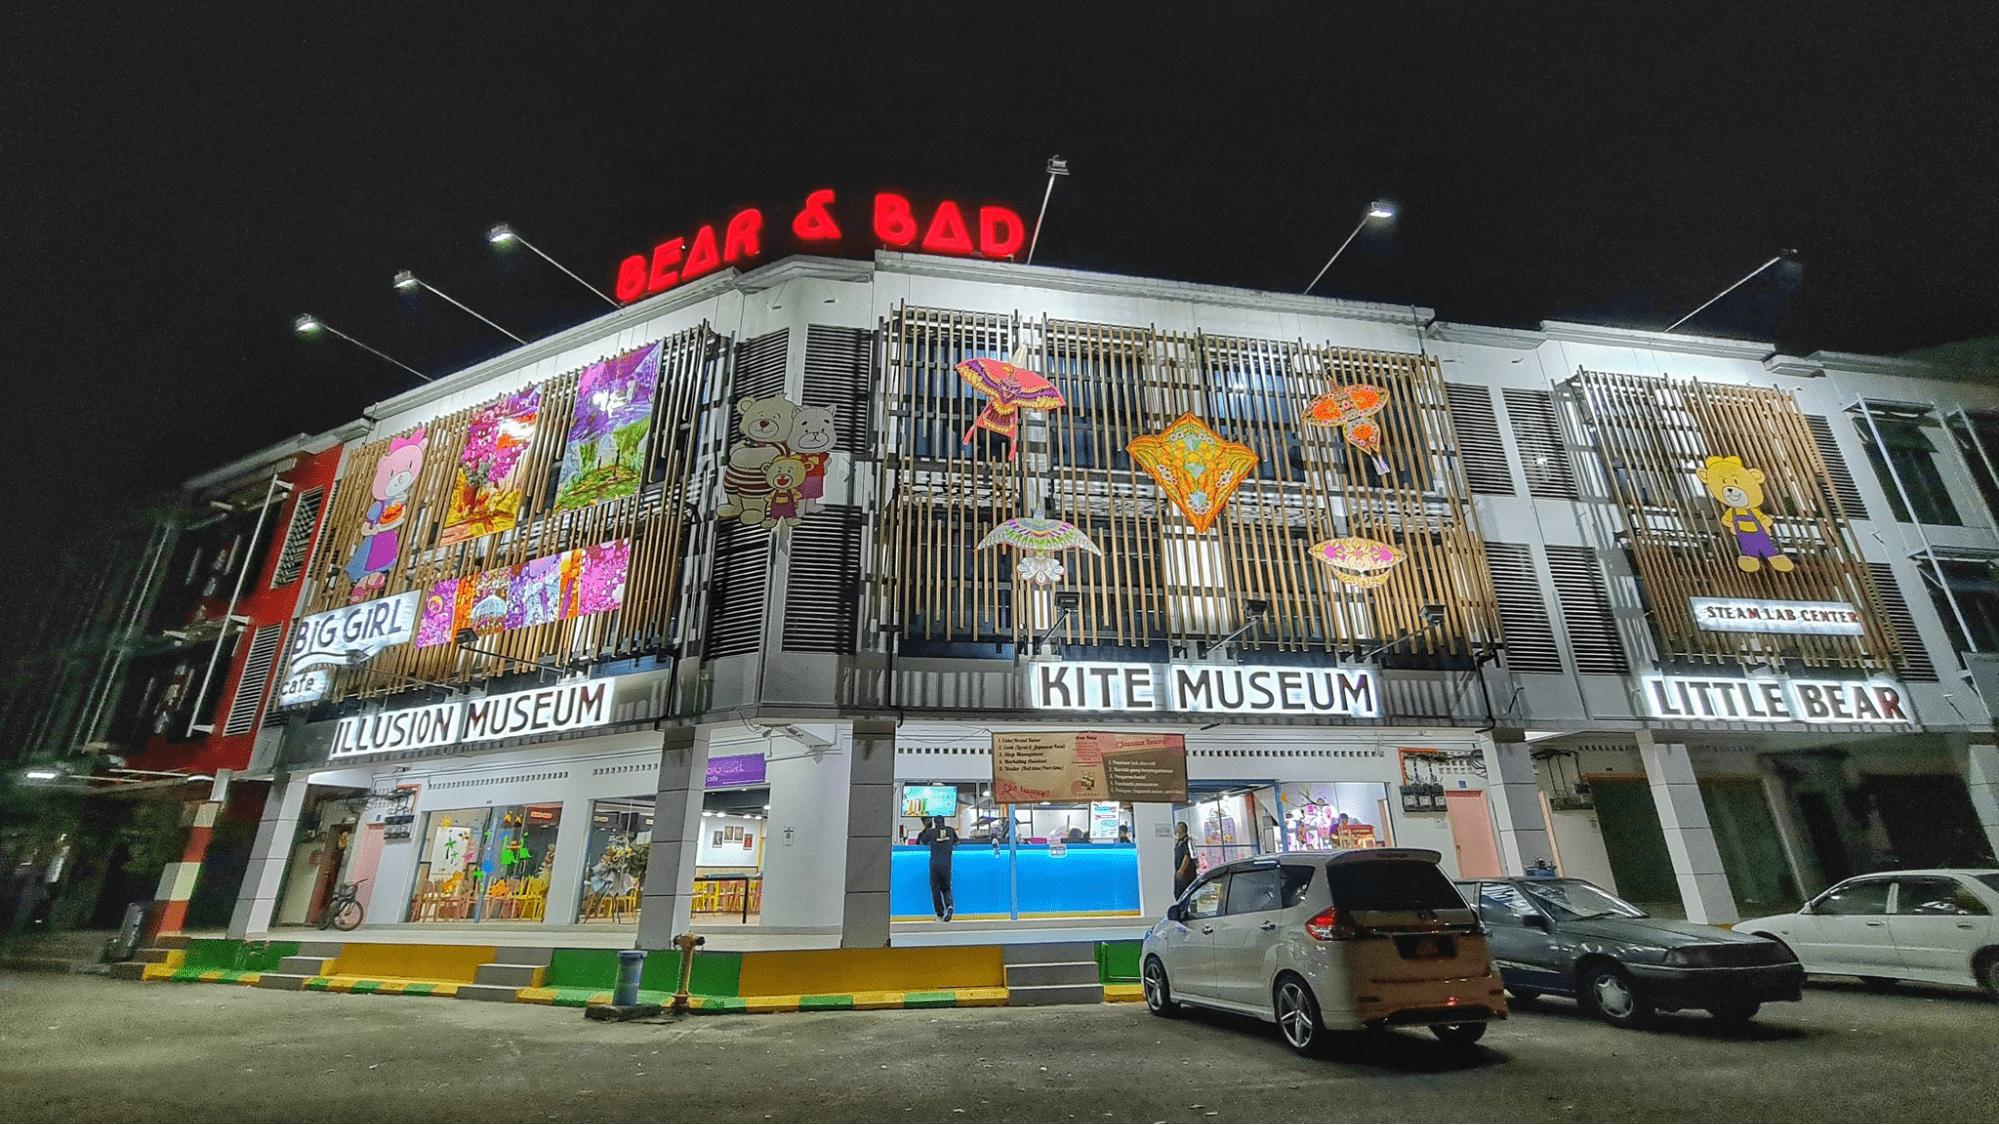 Bear & Bad Theme Museum - Outer View